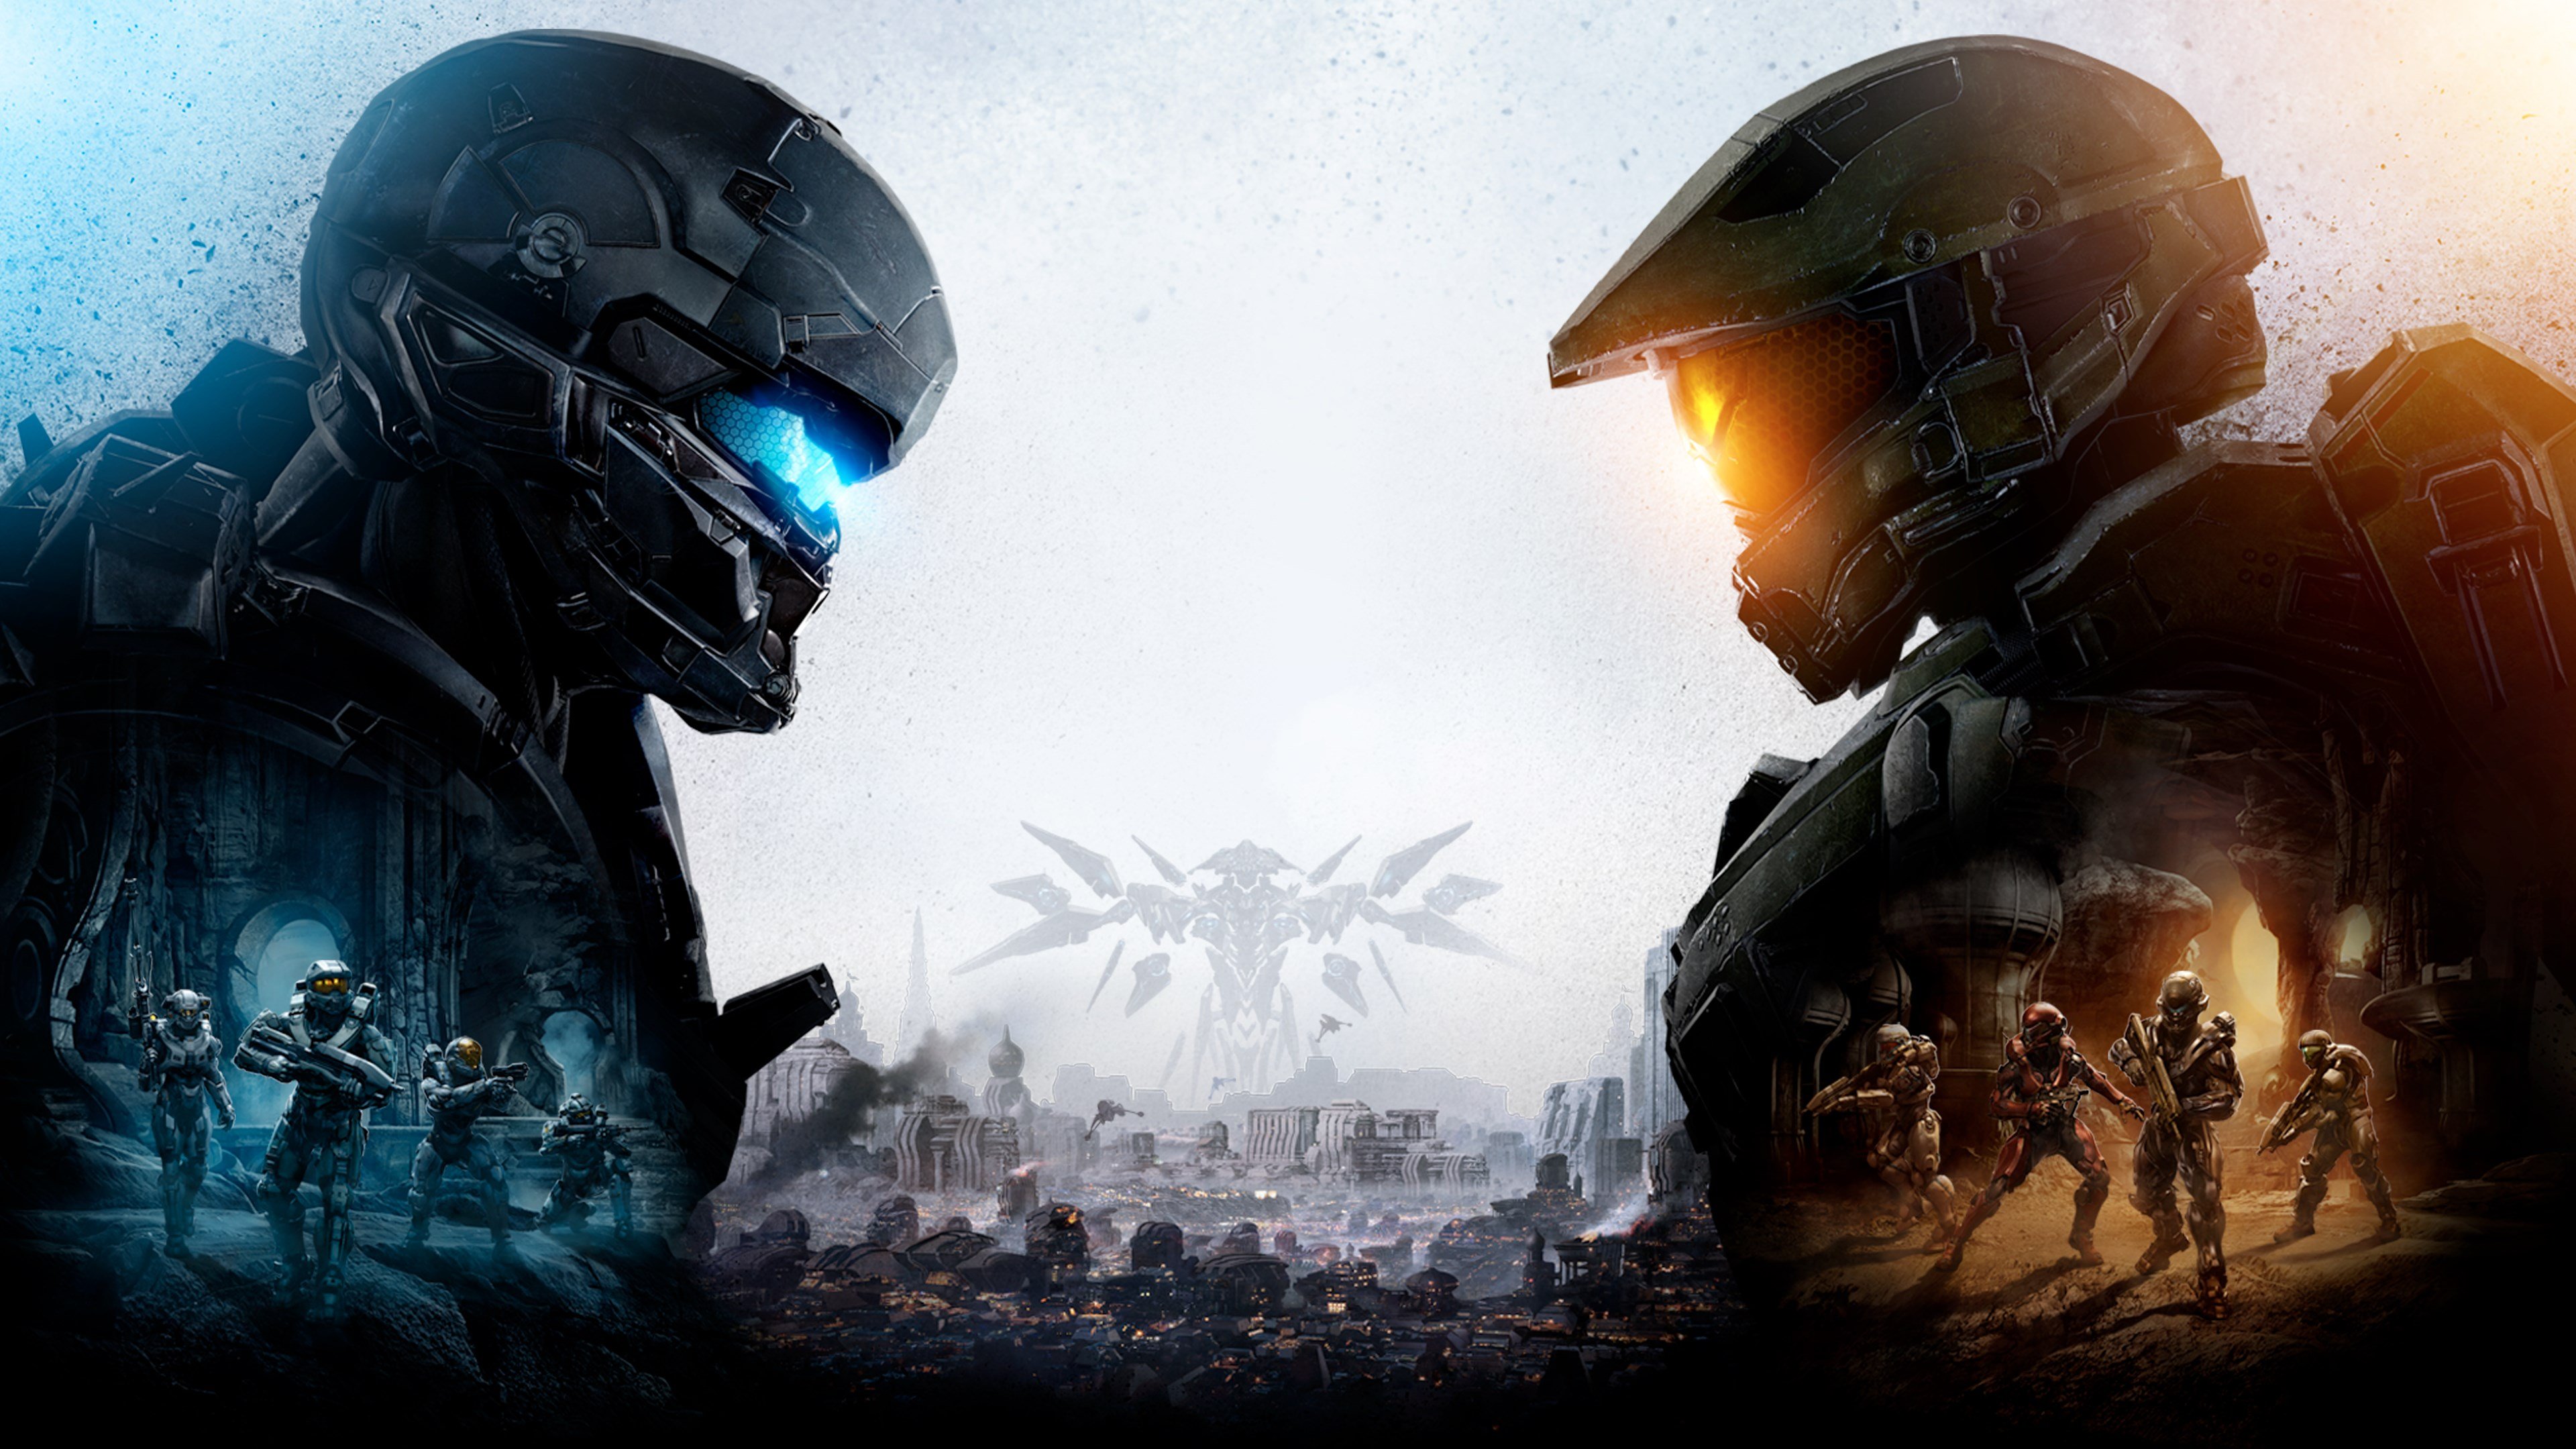 Halo 5: Guardians cover image